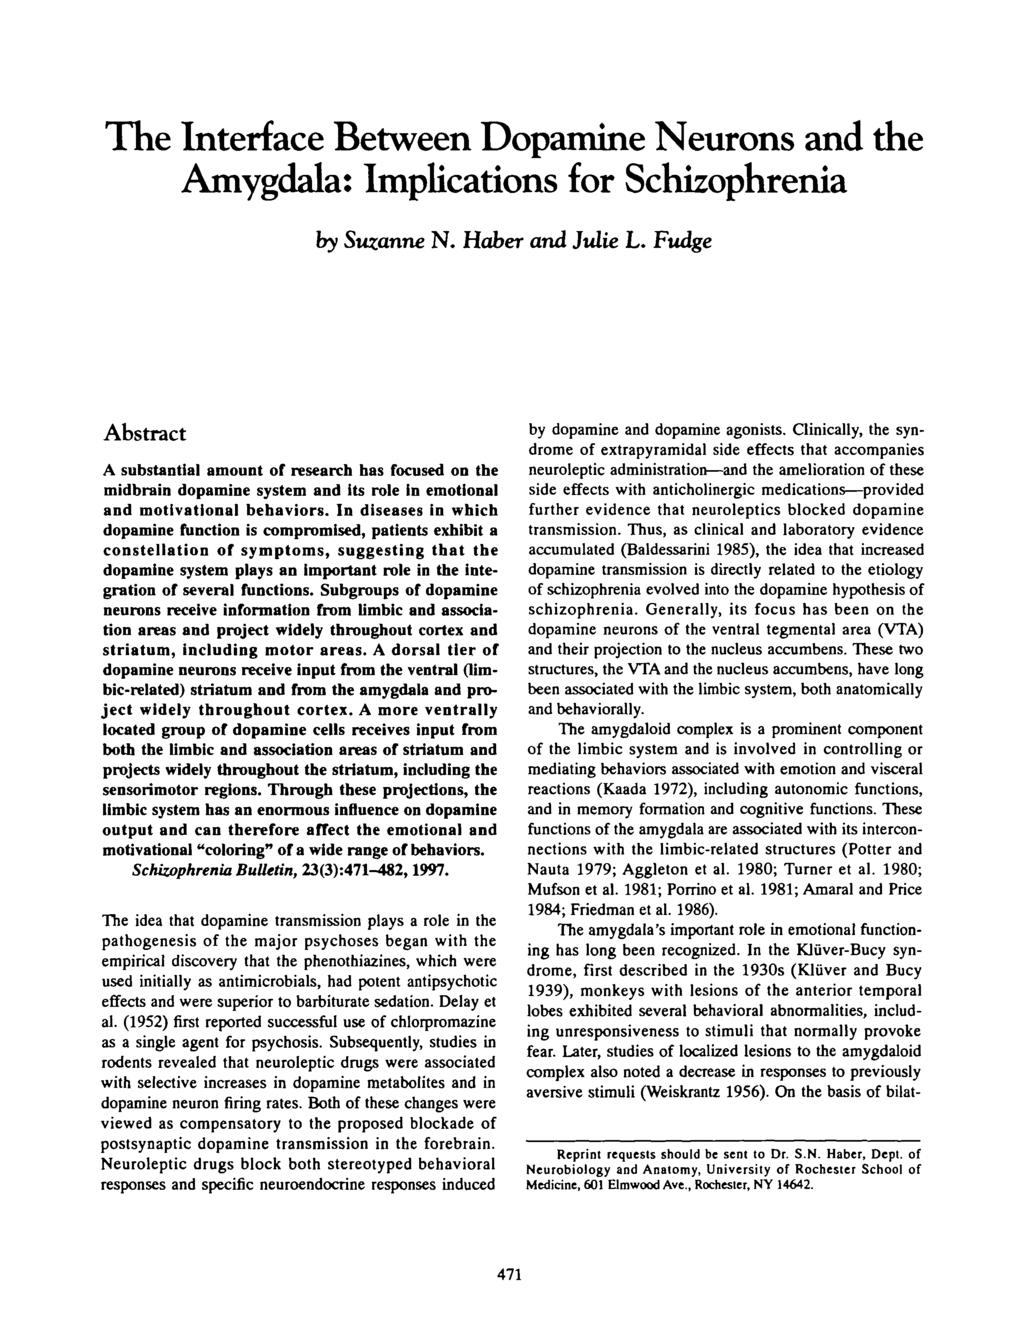 The Interface Between Dopamine Neurons and the Amygdala: Implications for Schizophrenia by Suzanne N. Haber and Julie L.